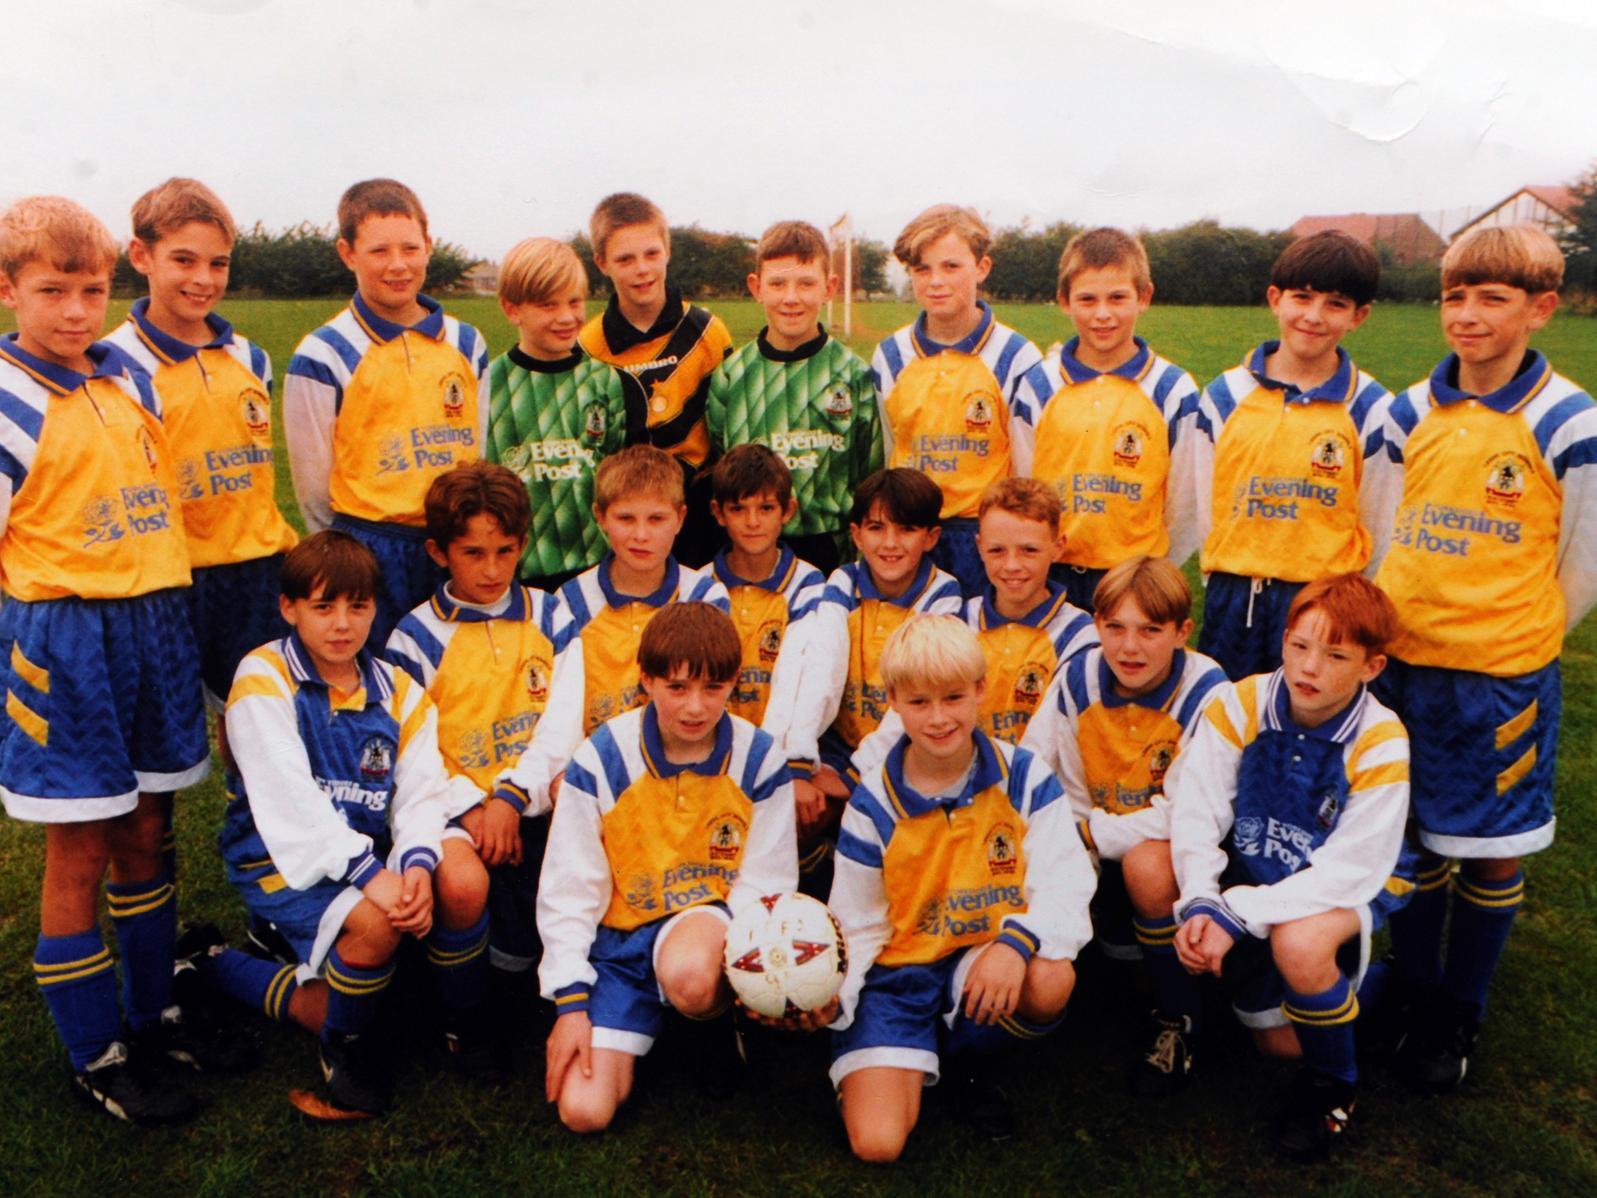 Sponsored by the YEP this side were unbeaten in the Junior Star League when this photo was taken. Do you recognise anyone?